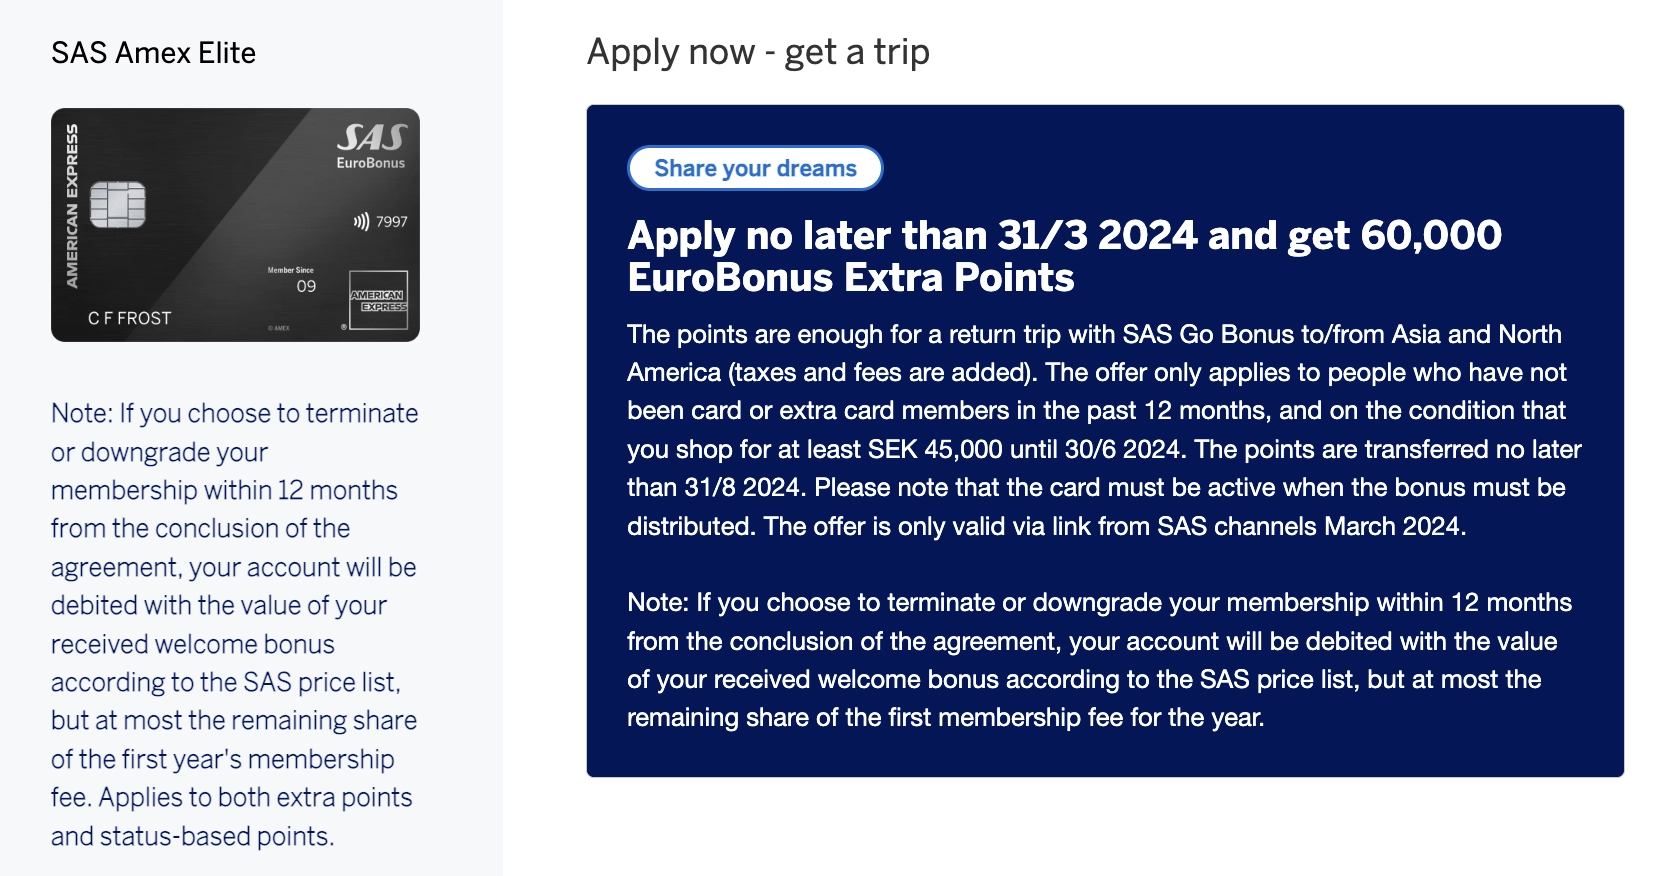 Get 60.000 EuroBonus Points when applying for the SAS Amex Elite in March 2024.